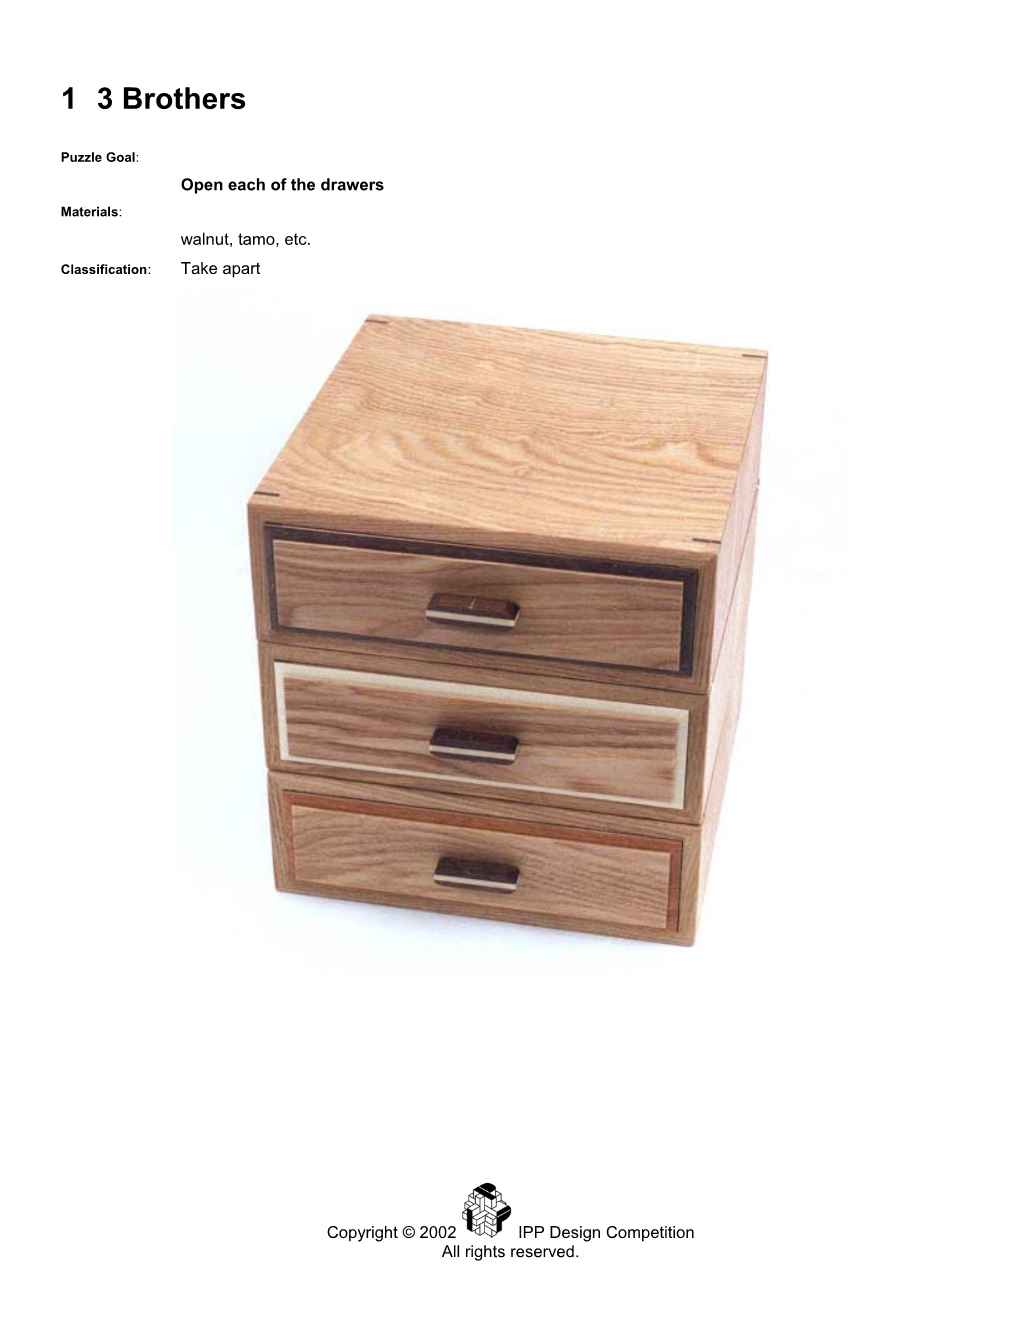 Open Each of the Drawers